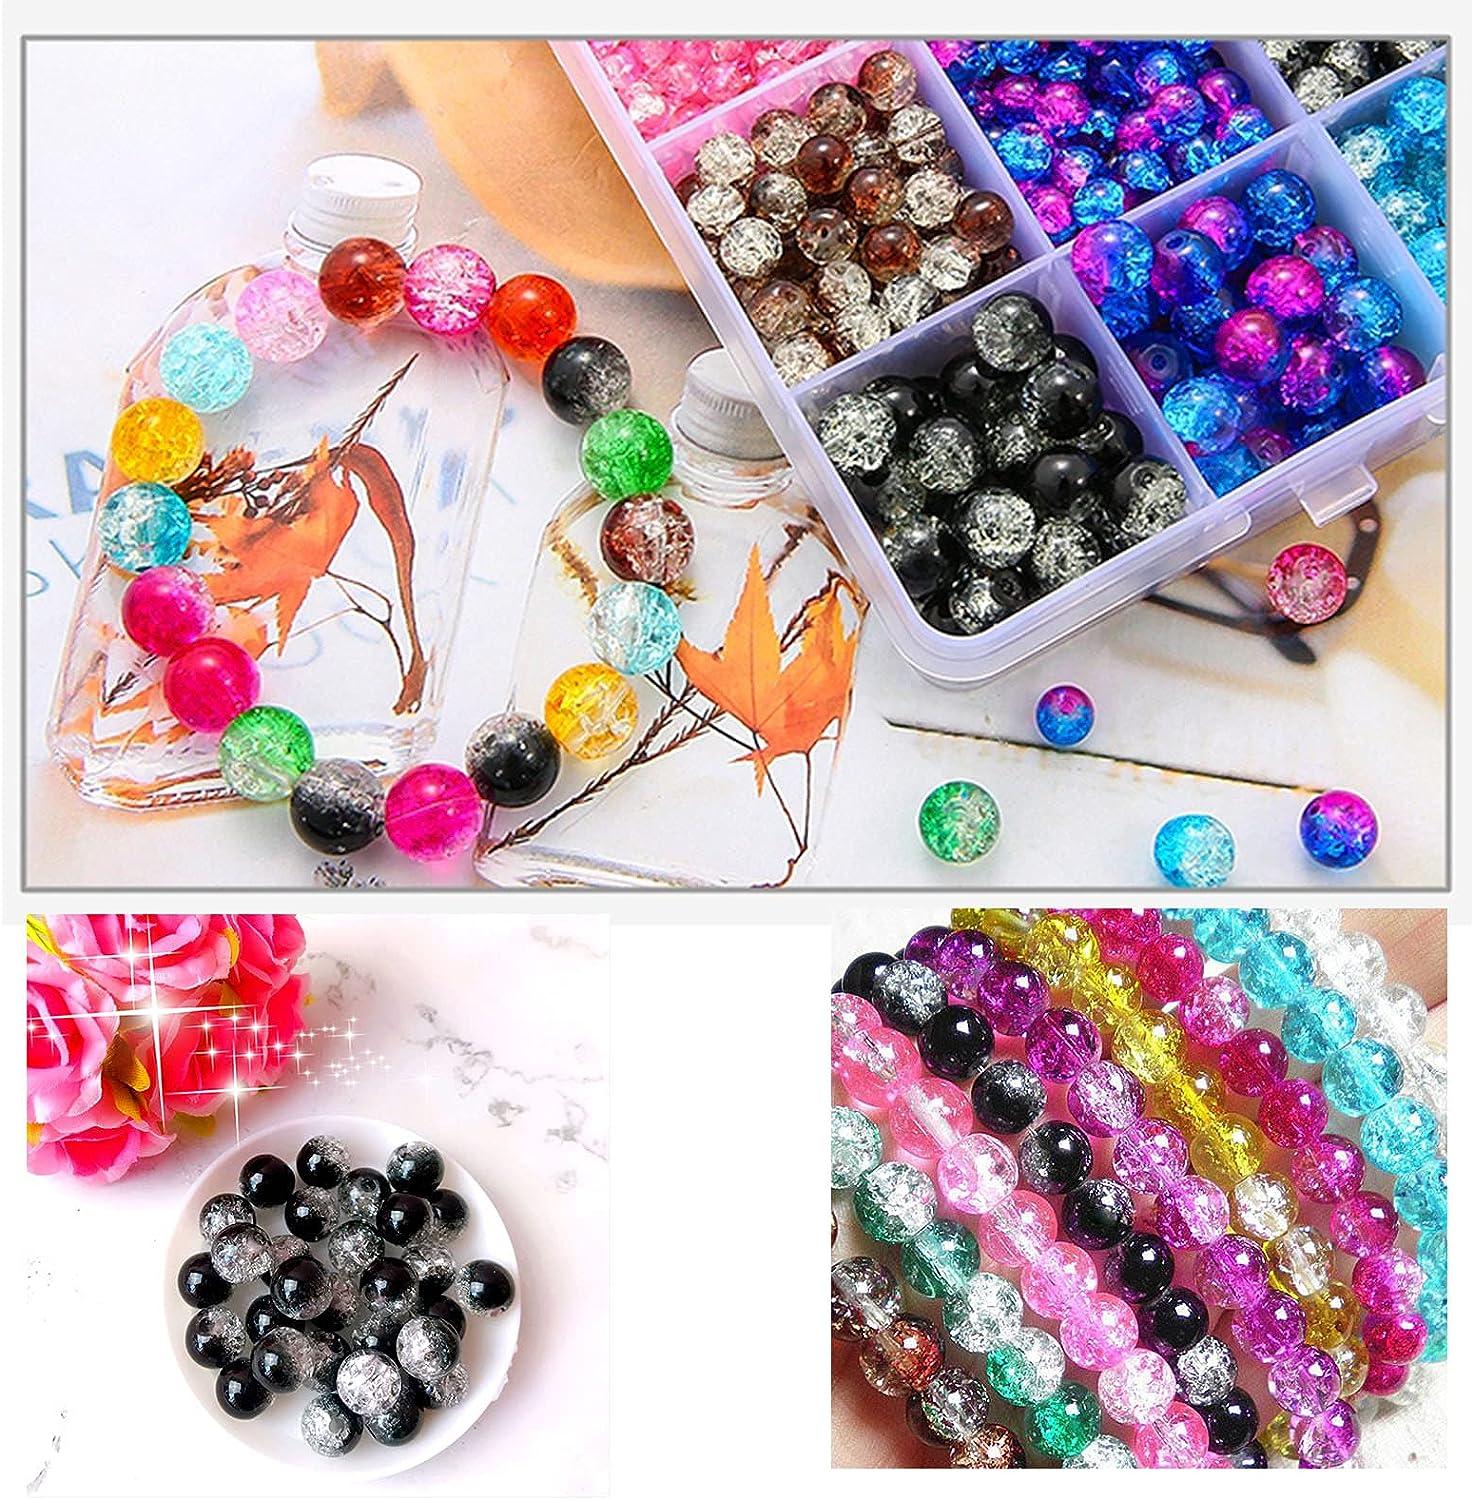 Huisipool 1920pcs 8 Color Glass Beads for Jewelry Making, 4mm 6mm 8mm Round Spacer Loose Beads used for Bracelet Necklace ACC